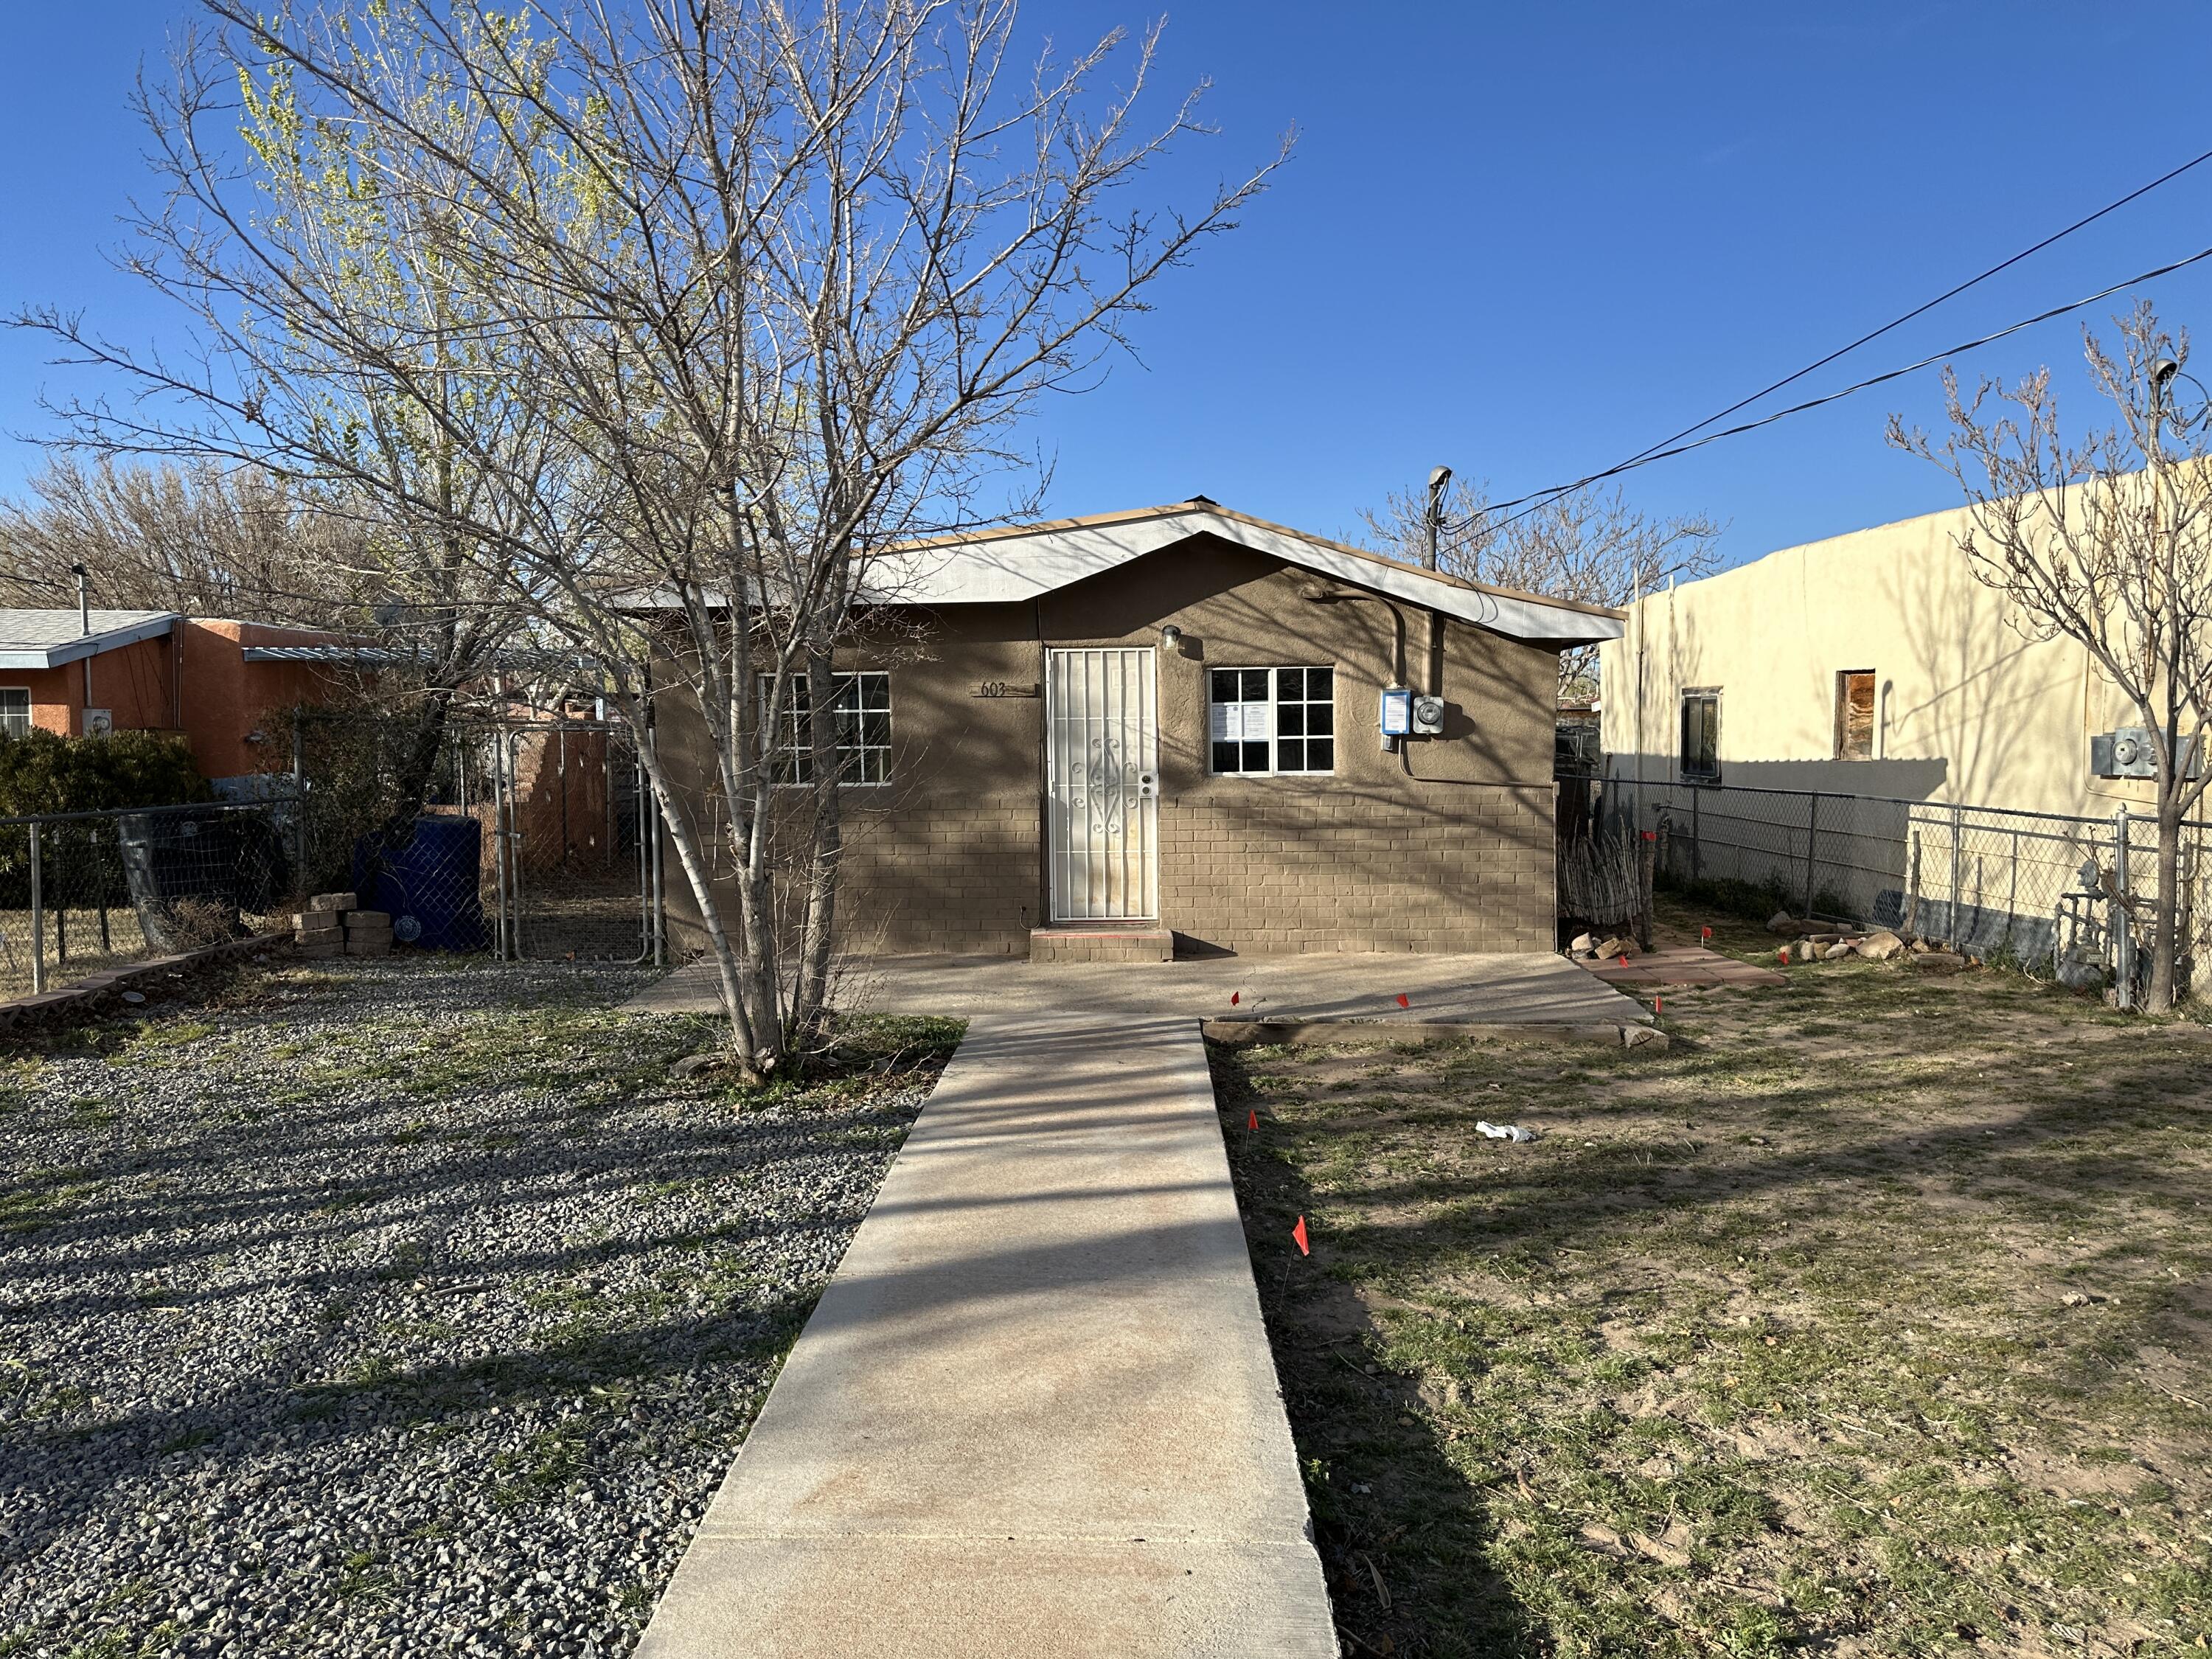 This 1-story single family home features 1 bedroom, 1 bathroom, storage shed and sits on a large .16 acre fully fenced lot. Show and sell today! Home is eligible for $100 down payment program when using FHA 203 (b) or FHA 203 (k)​​‌​​​​‌​​‌‌​‌‌‌​​‌‌​‌‌‌​​‌‌​‌‌‌ financing.